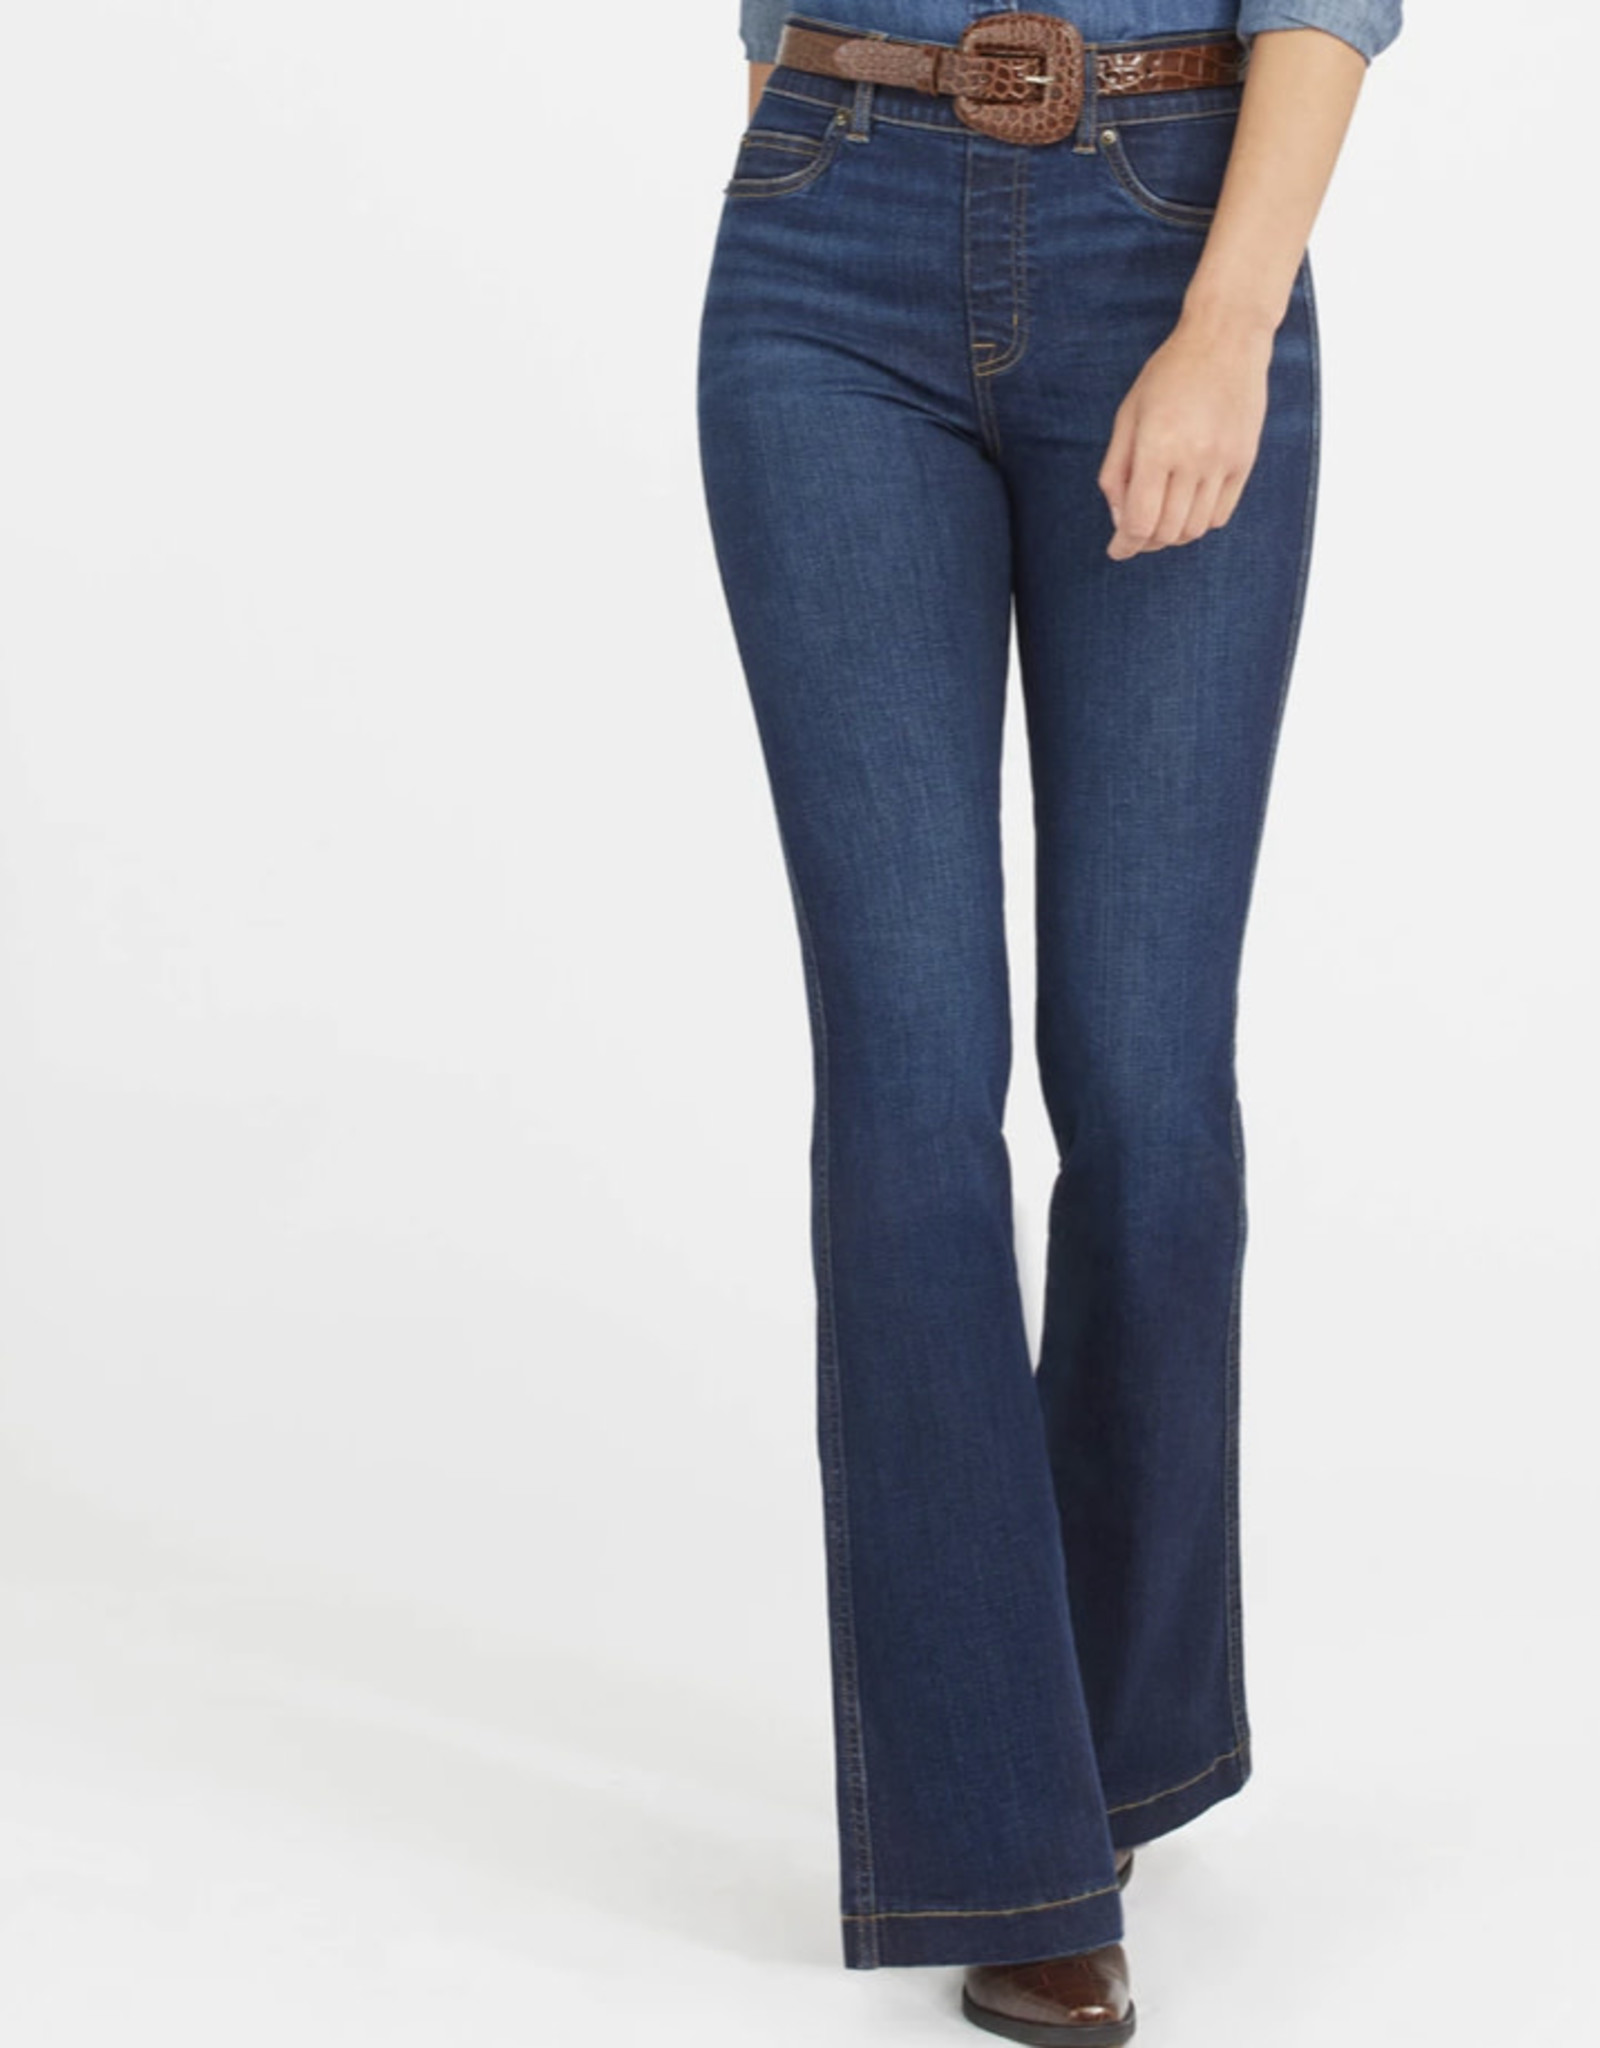 Spanx flare jeans 20327R